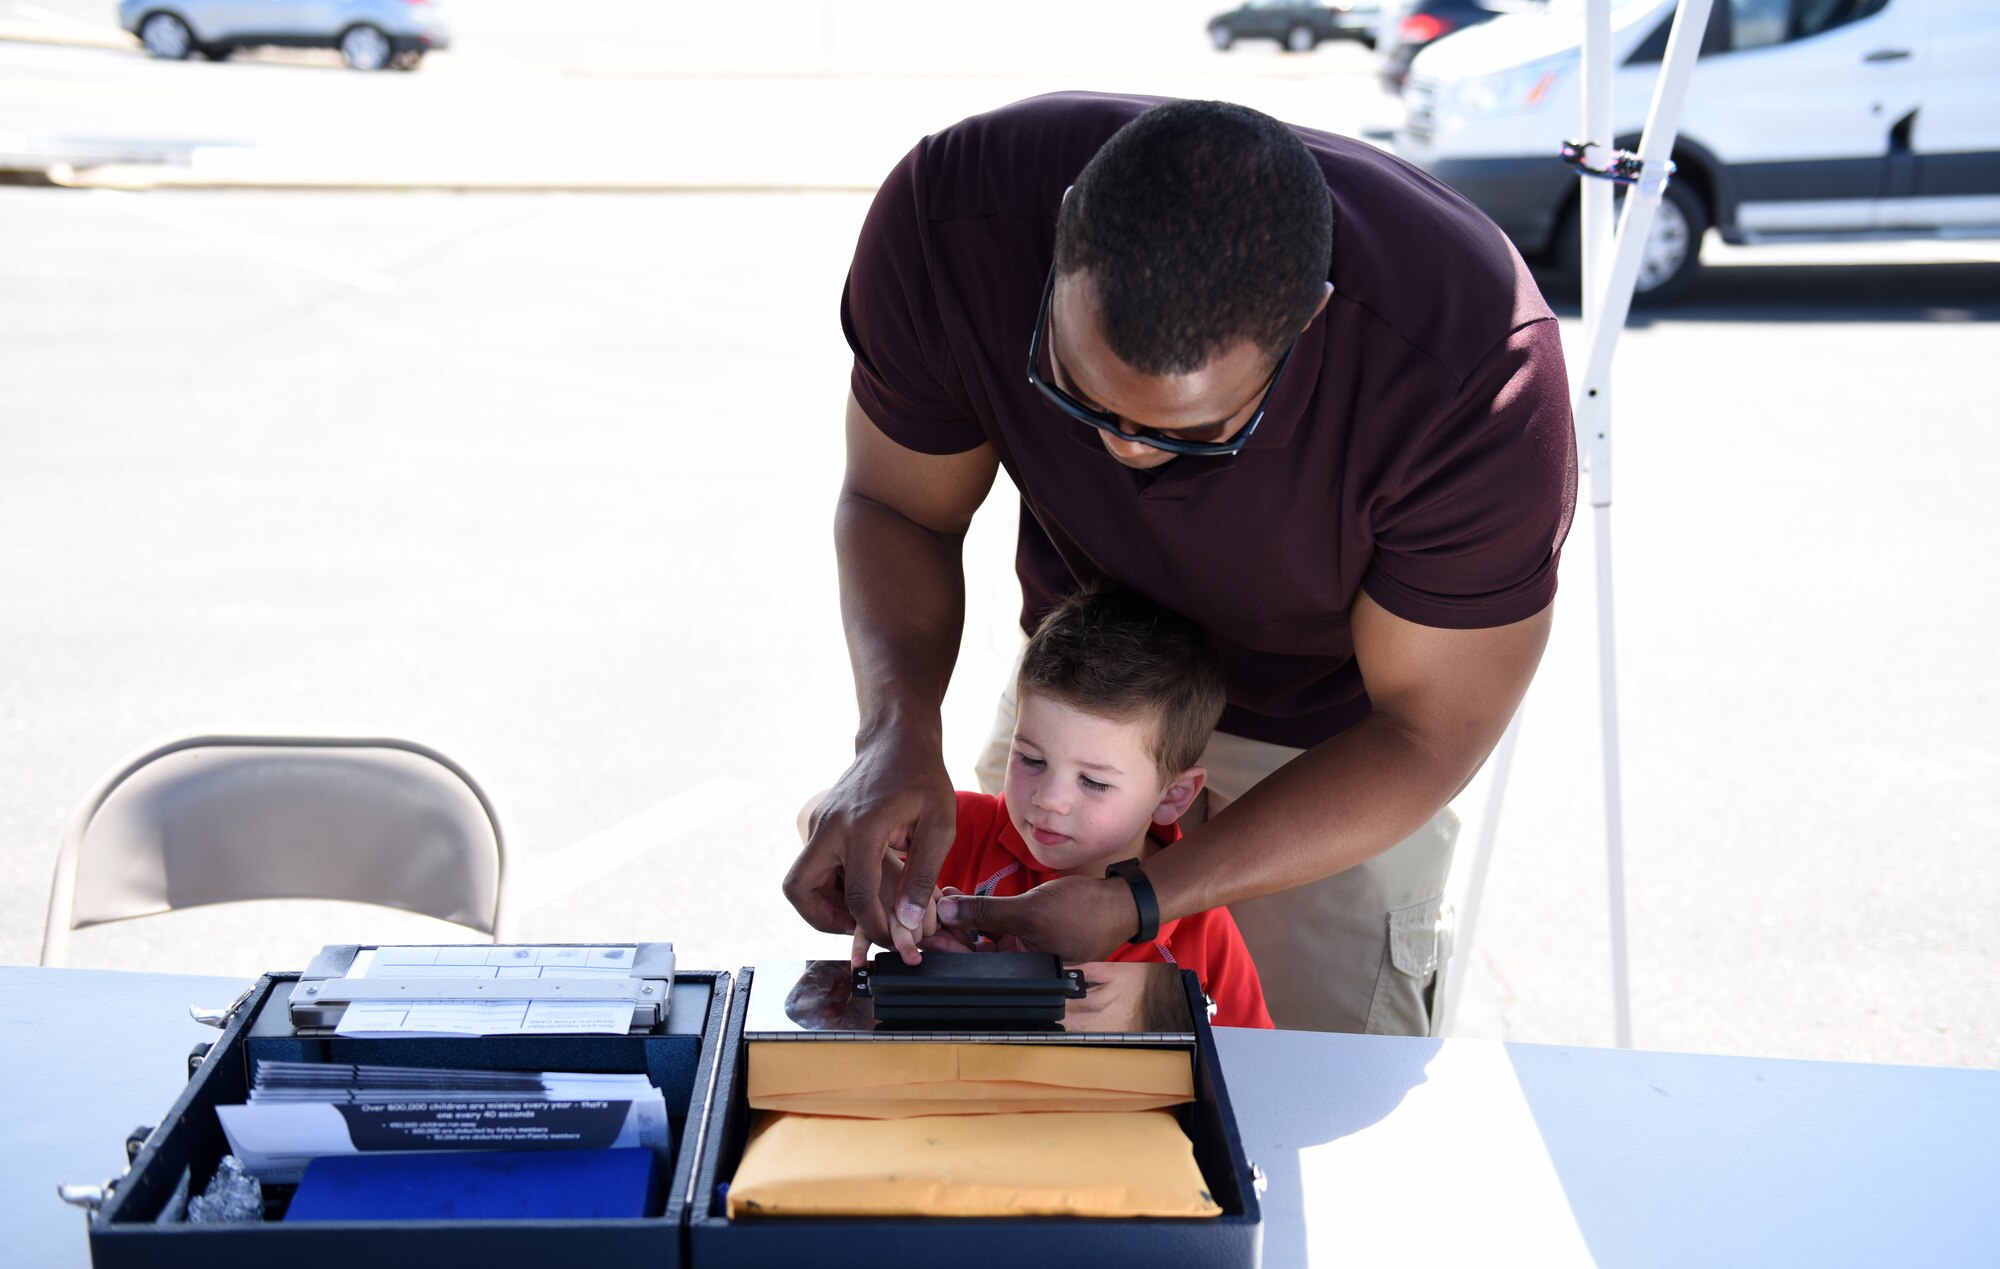 U.S. Air Force Tech. Sgt. Antonio Burton, 460th Security Forces Squadron investigator, provides fingerprints for Connor Collier, the son of Heather and Tech. Sgt. Bryan Collier, 460th SFS visitor center NCO in charge, as part of a Police Week demonstration at Buckley Air Force Base, Colorado, May 17, 2018.